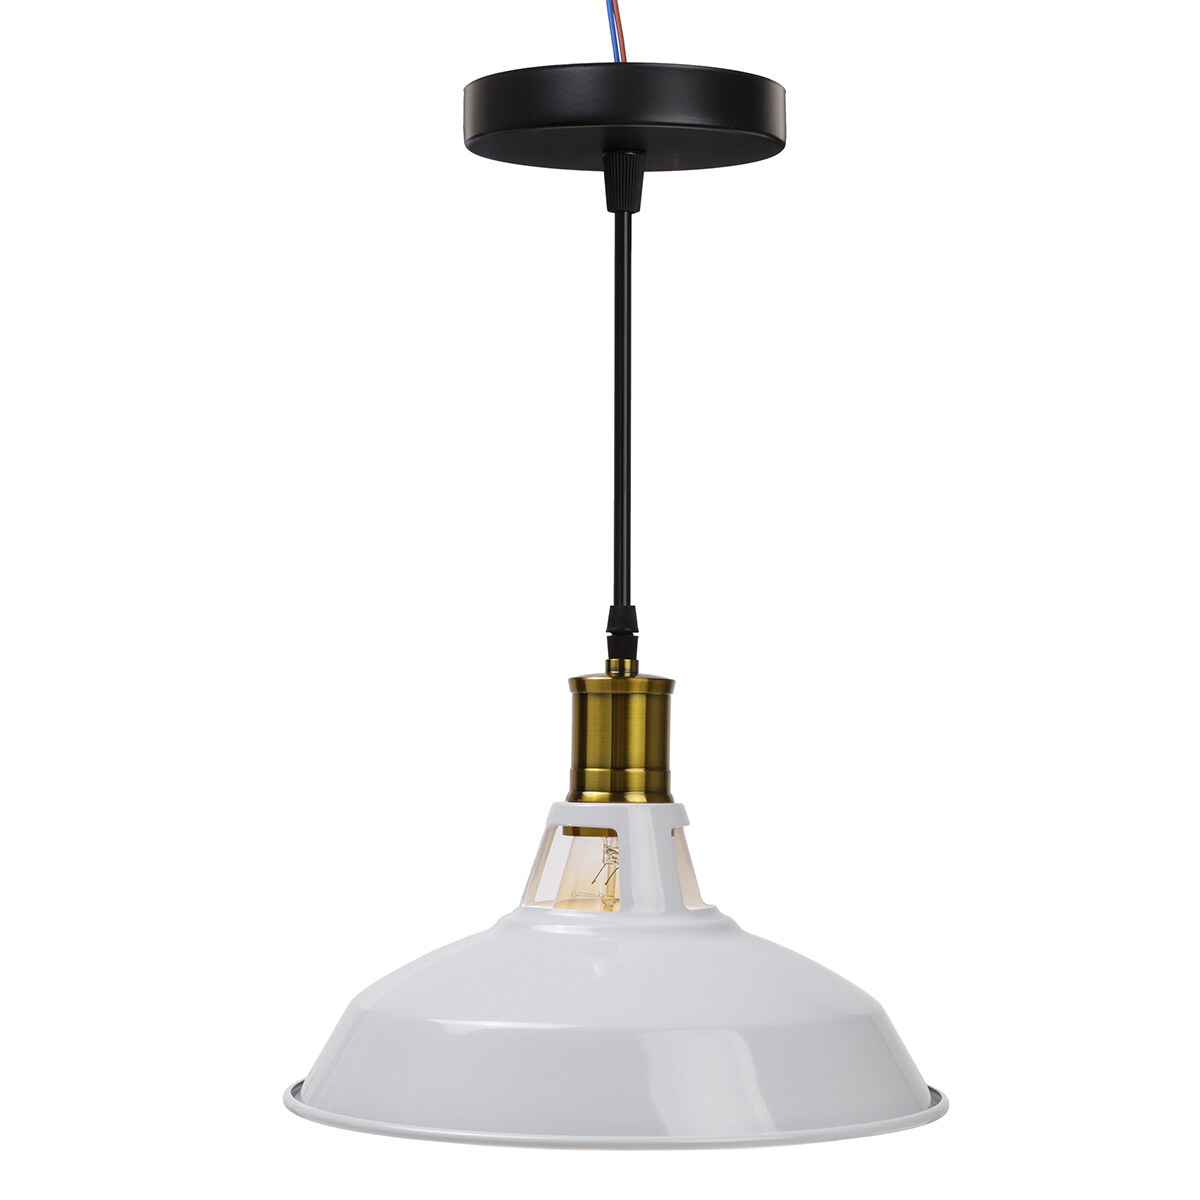 Details about   Industrial Rustic Ceiling Pendant Chandelier Light Lamp Shades For E27 Bulb 